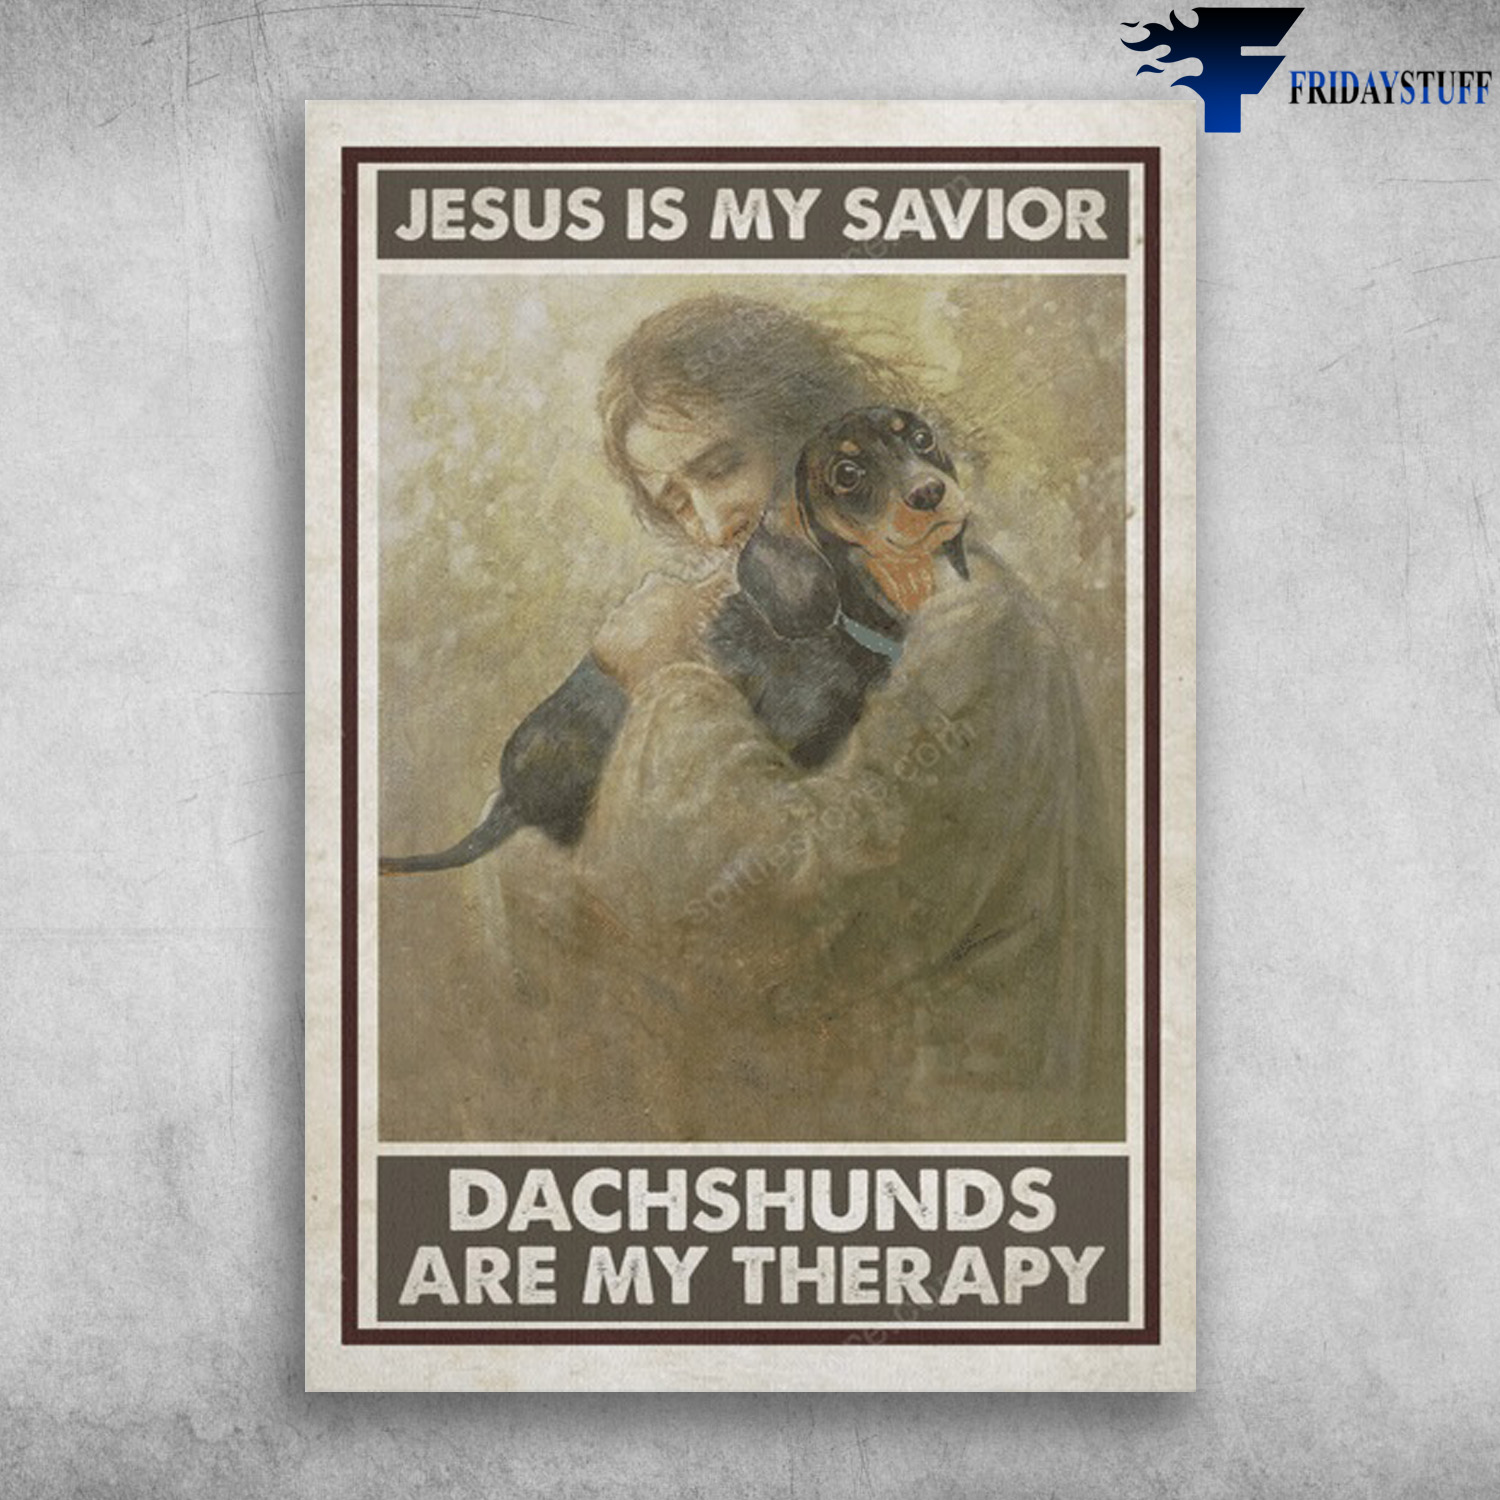 God And Dachshunds - Jesus Is My Savior, Dachshunds Are My Therapy